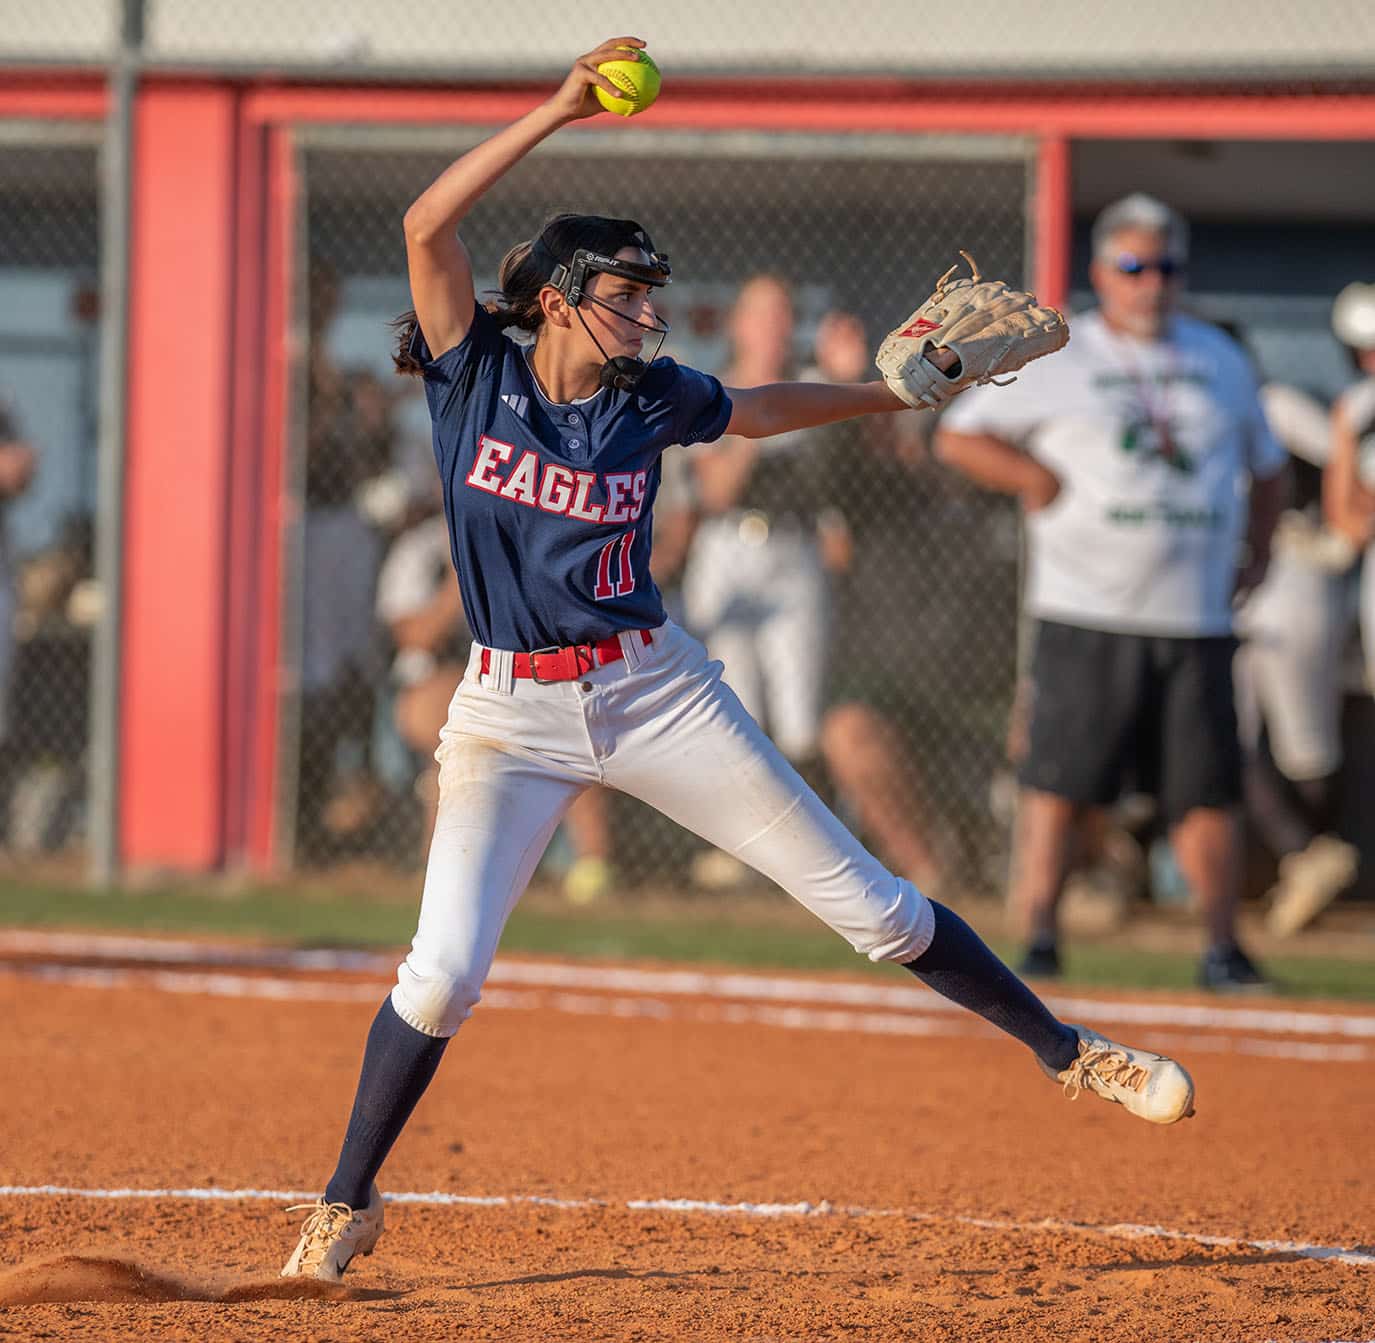 Springstead High’s Ava Miller delivers a pitch in her 6-1 win over visiting Weeki Wachee Tuesday evening. Photo by JOE DiCRISTOFALO﻿